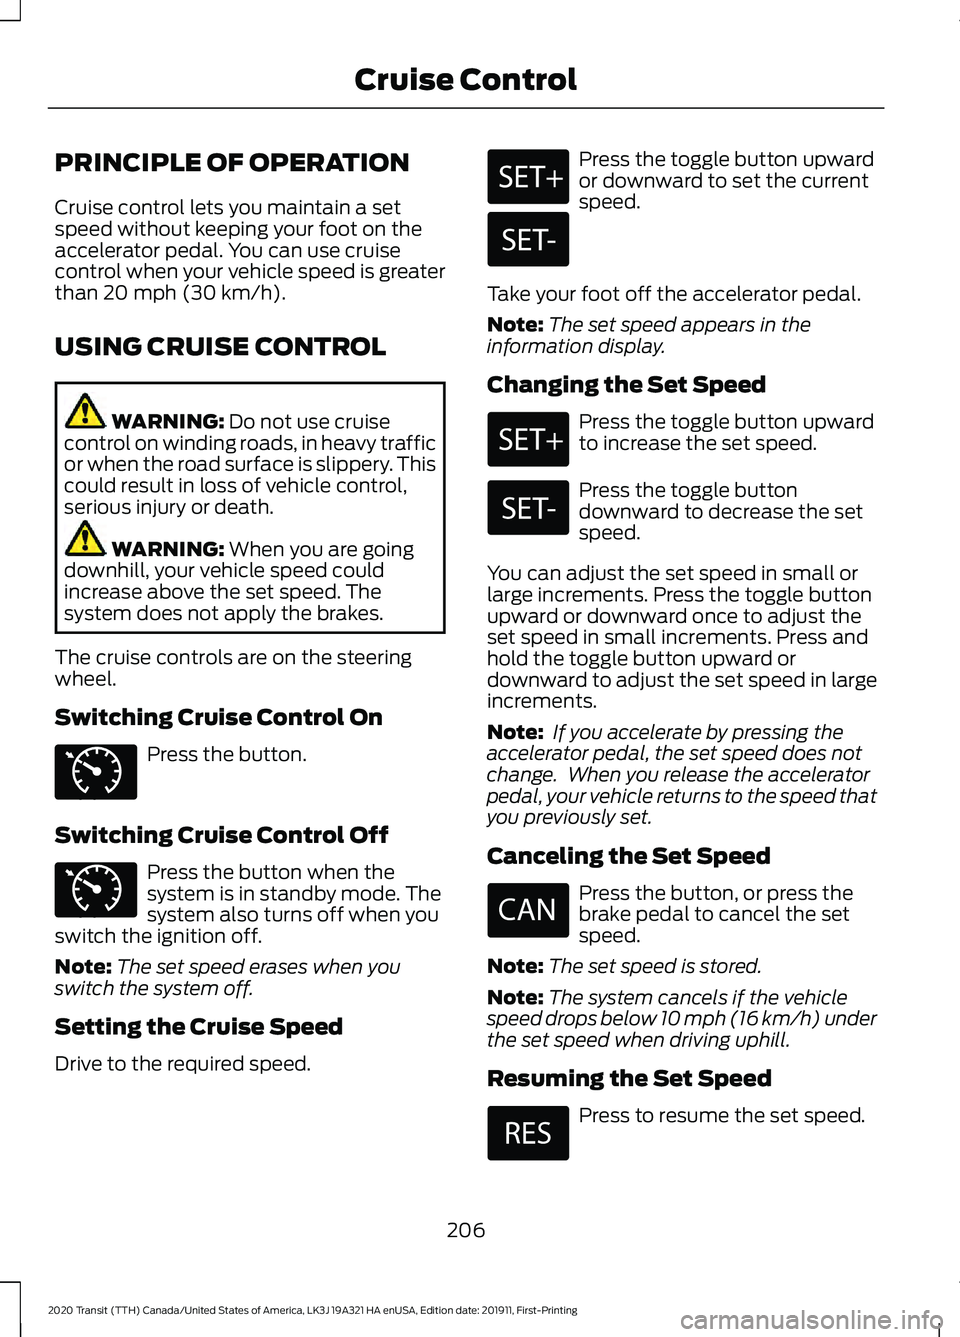 FORD TRANSIT 2020  Owners Manual PRINCIPLE OF OPERATION
Cruise control lets you maintain a set
speed without keeping your foot on the
accelerator pedal. You can use cruise
control when your vehicle speed is greater
than 20 mph (30 km